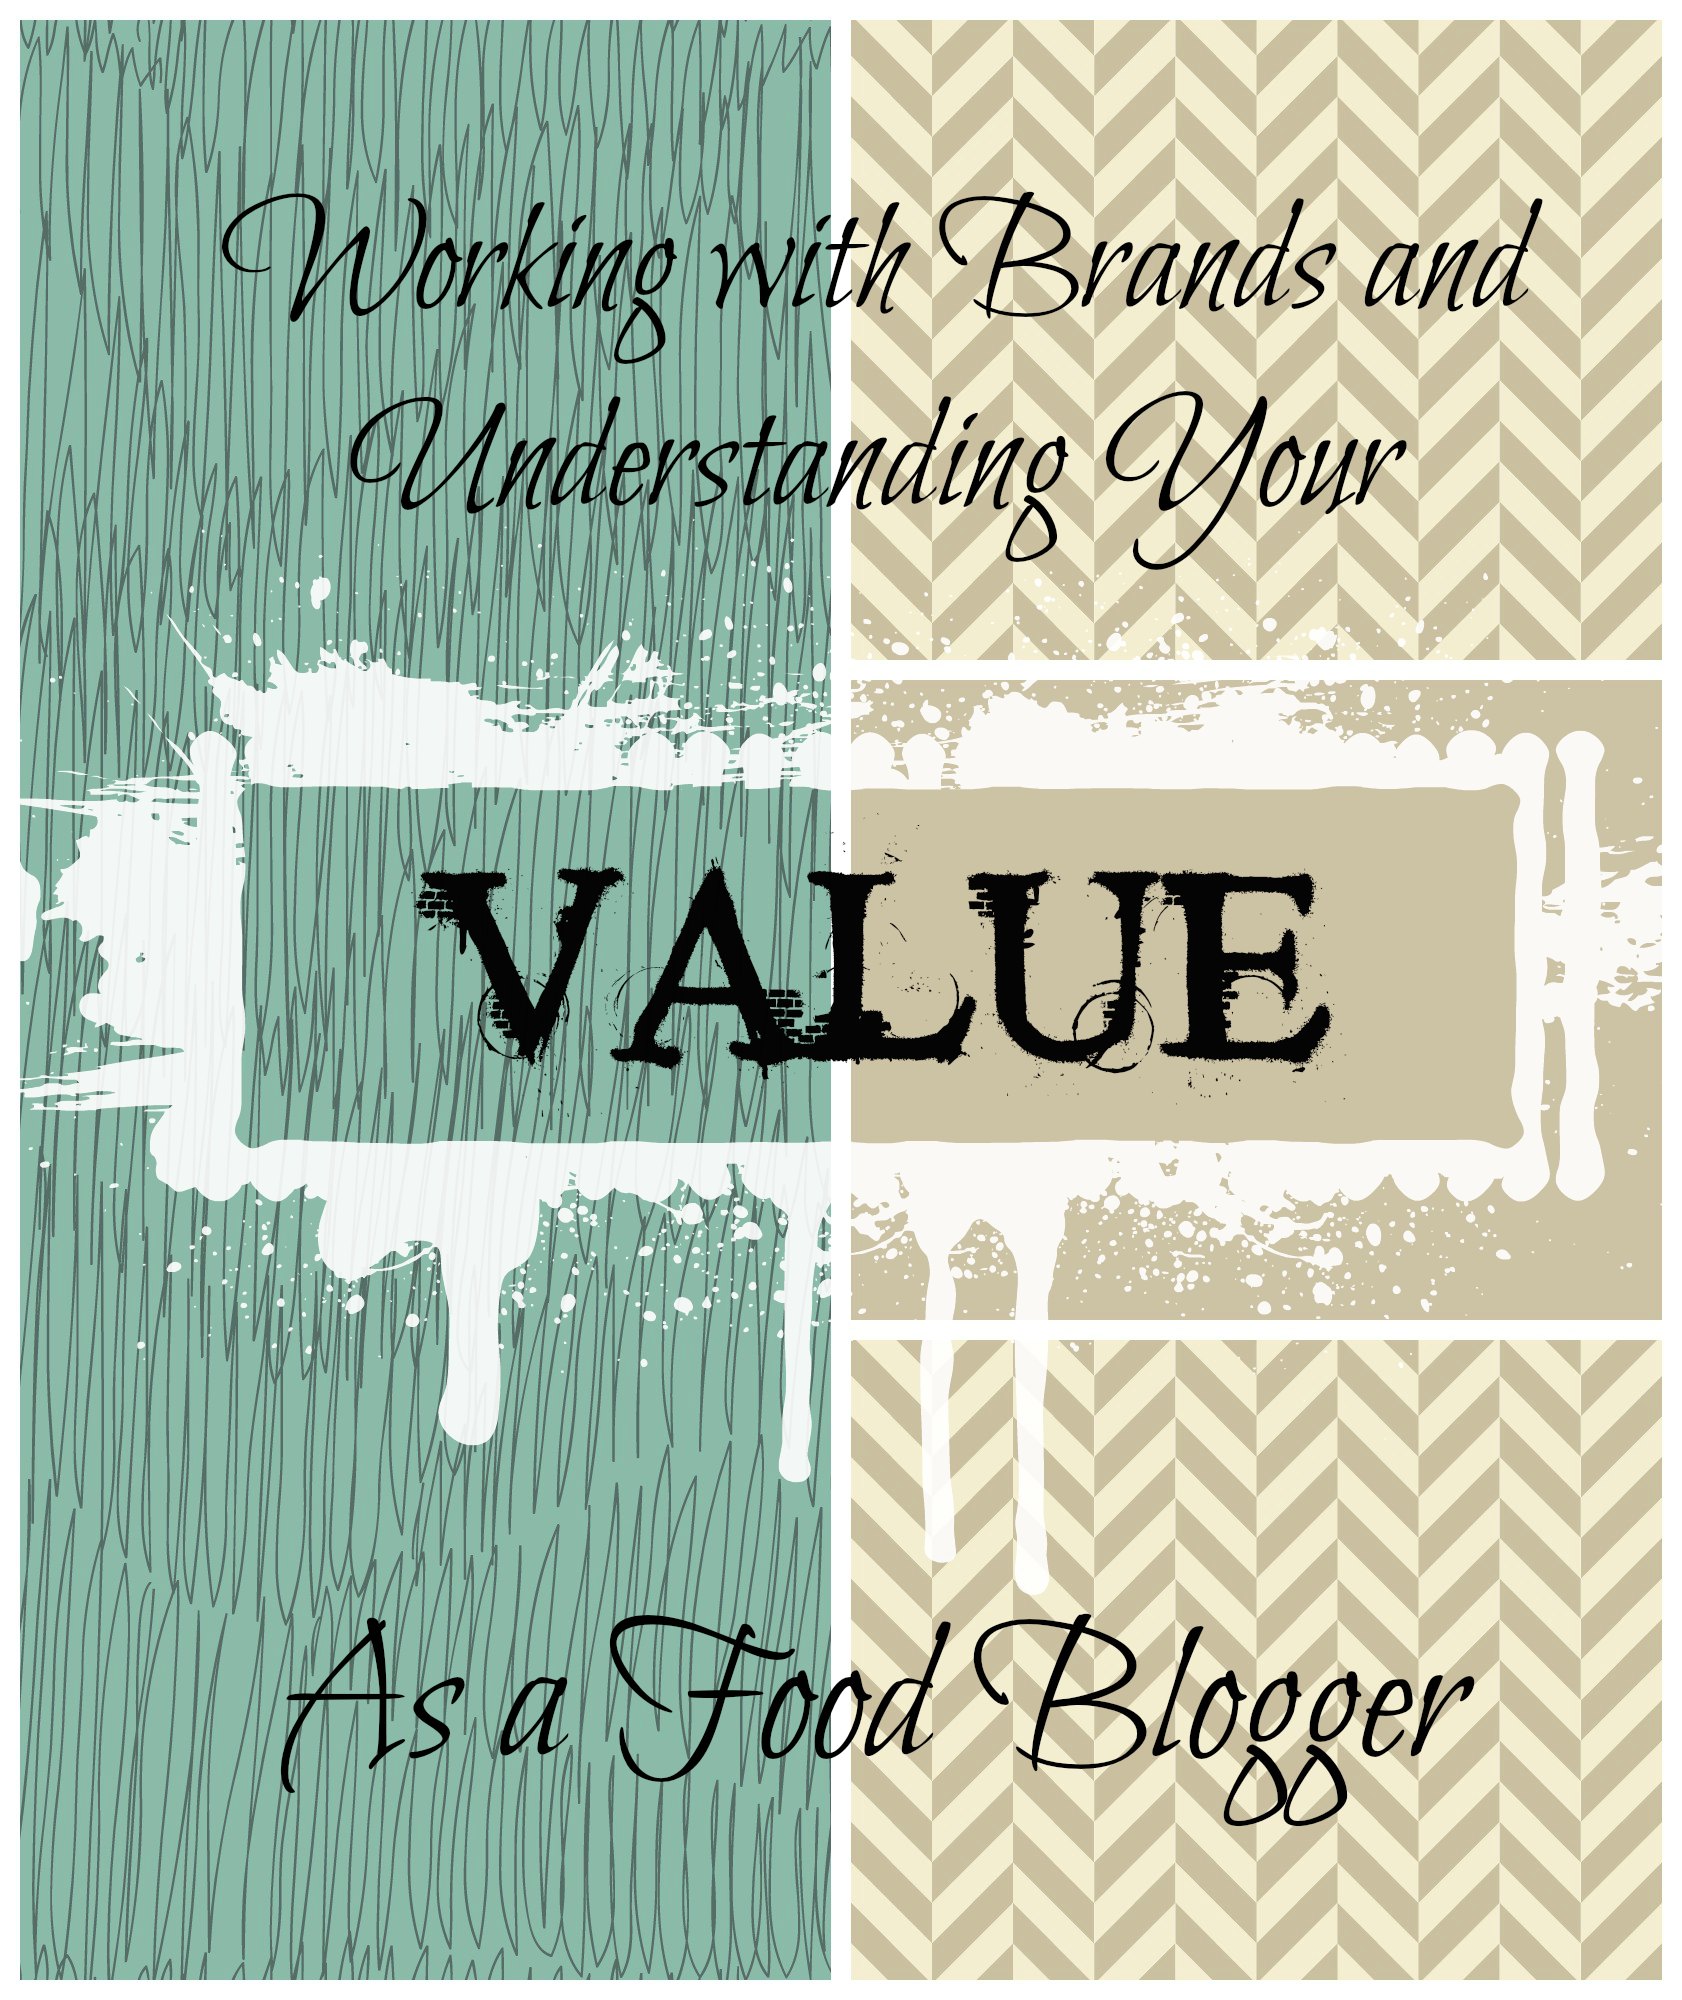 How to work with brands and understand your value as a food blogger - www.countrycleaver.com